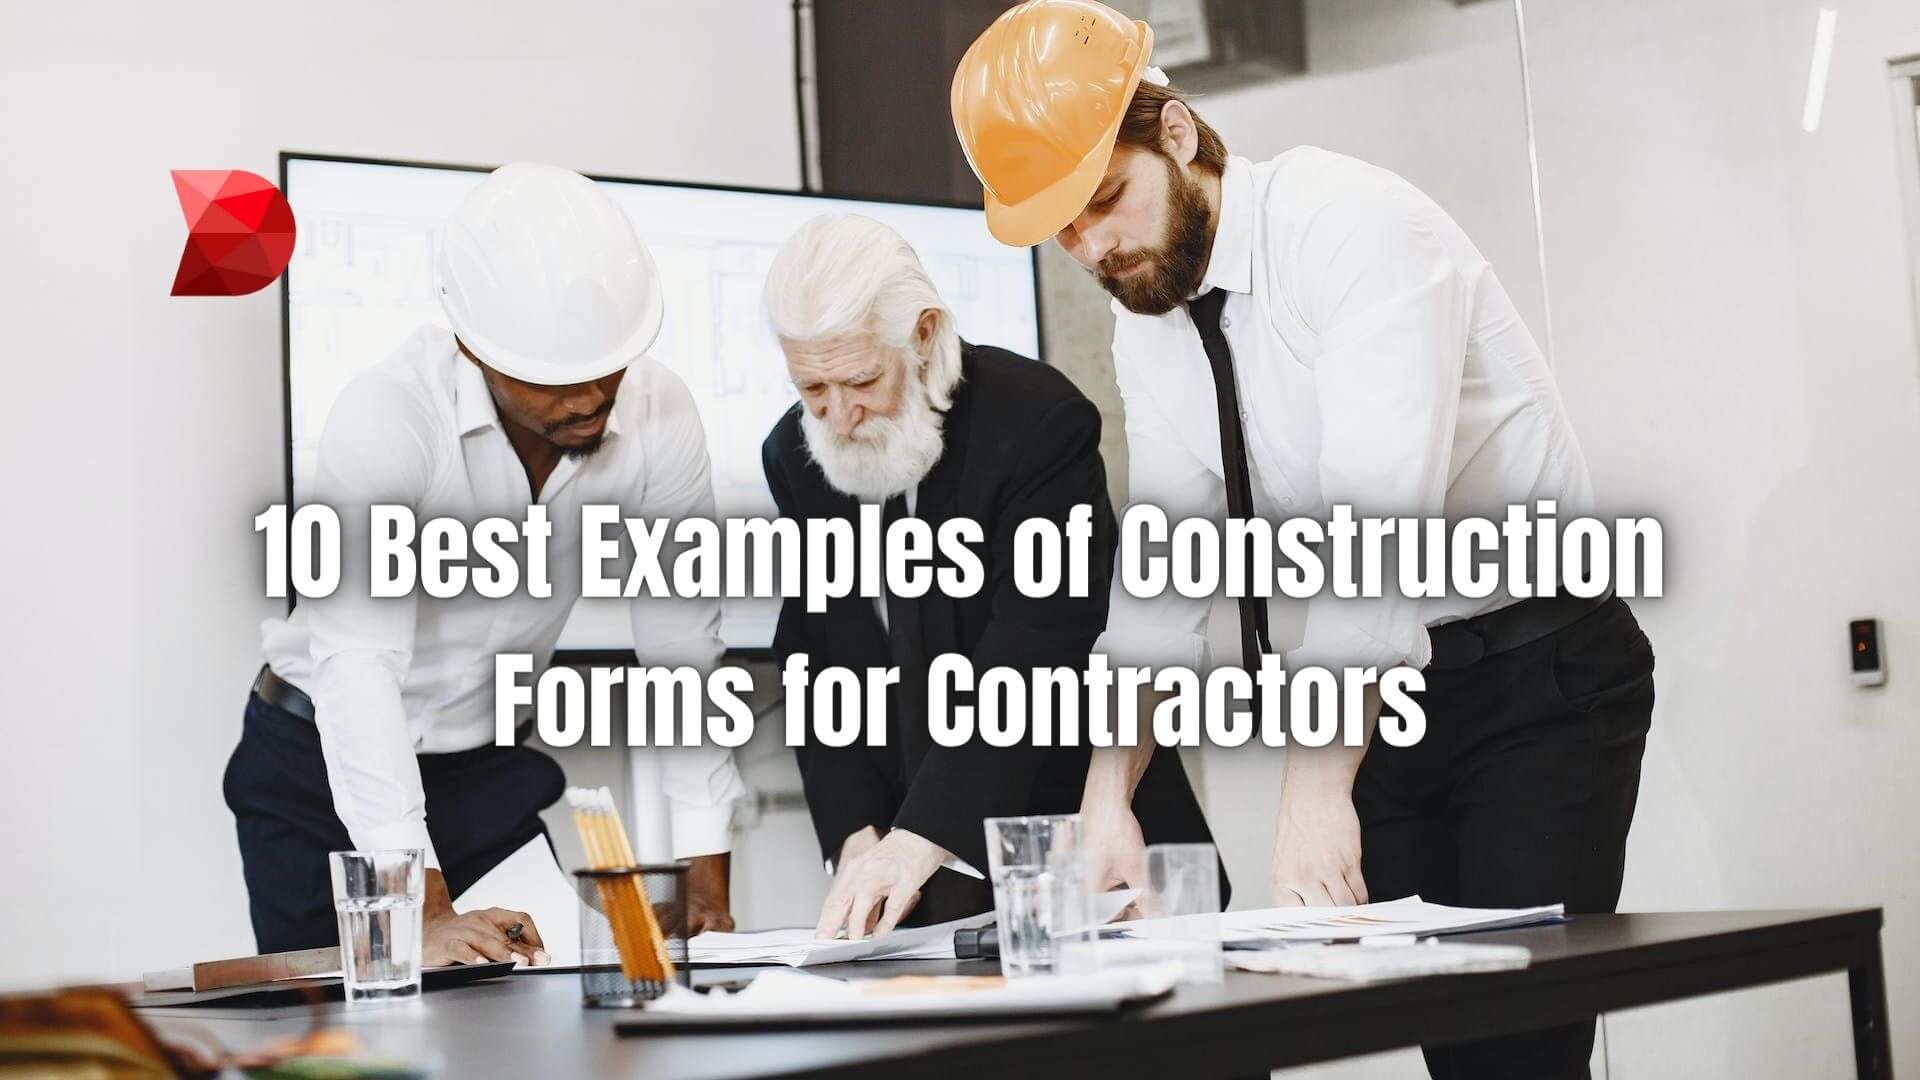 This article will introduce you to construction forms and give ten examples of useful and relevant forms for contractors. Learn more!